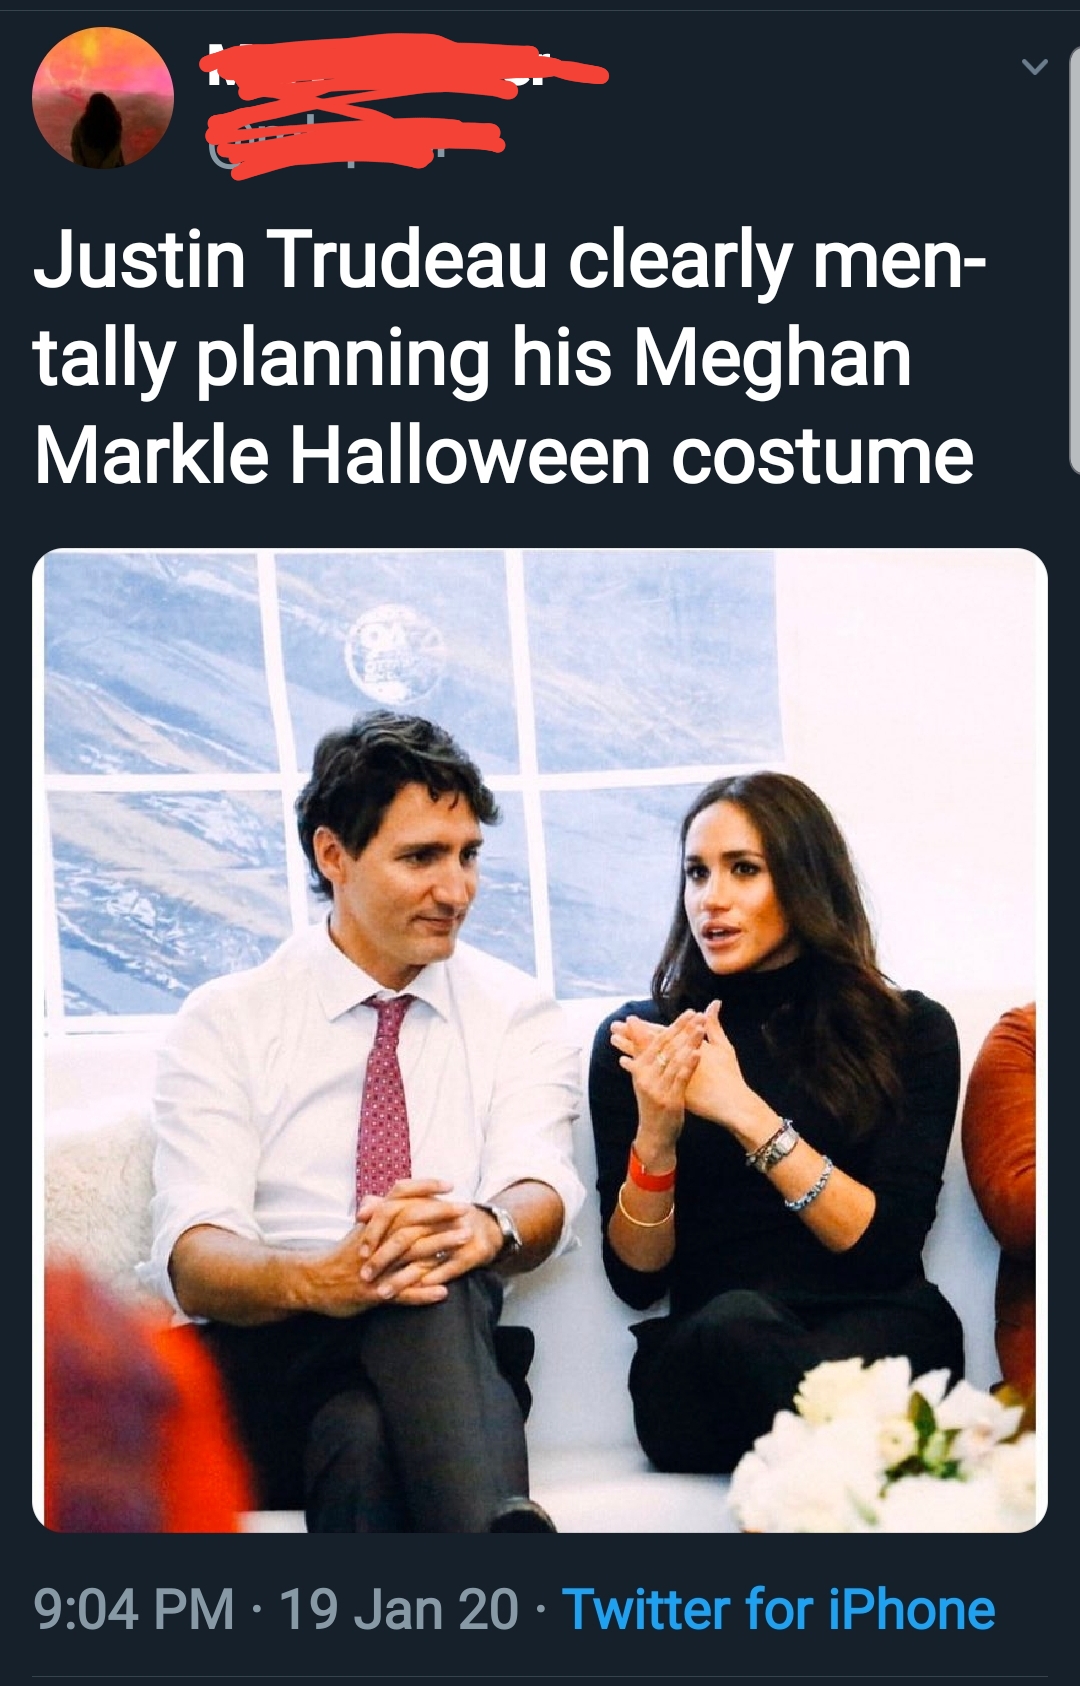 meghan markle and prince harry in canada - Justin Trudeau clearly men tally planning his Meghan Markle Halloween costume 19 Jan 20 Twitter for iPhone